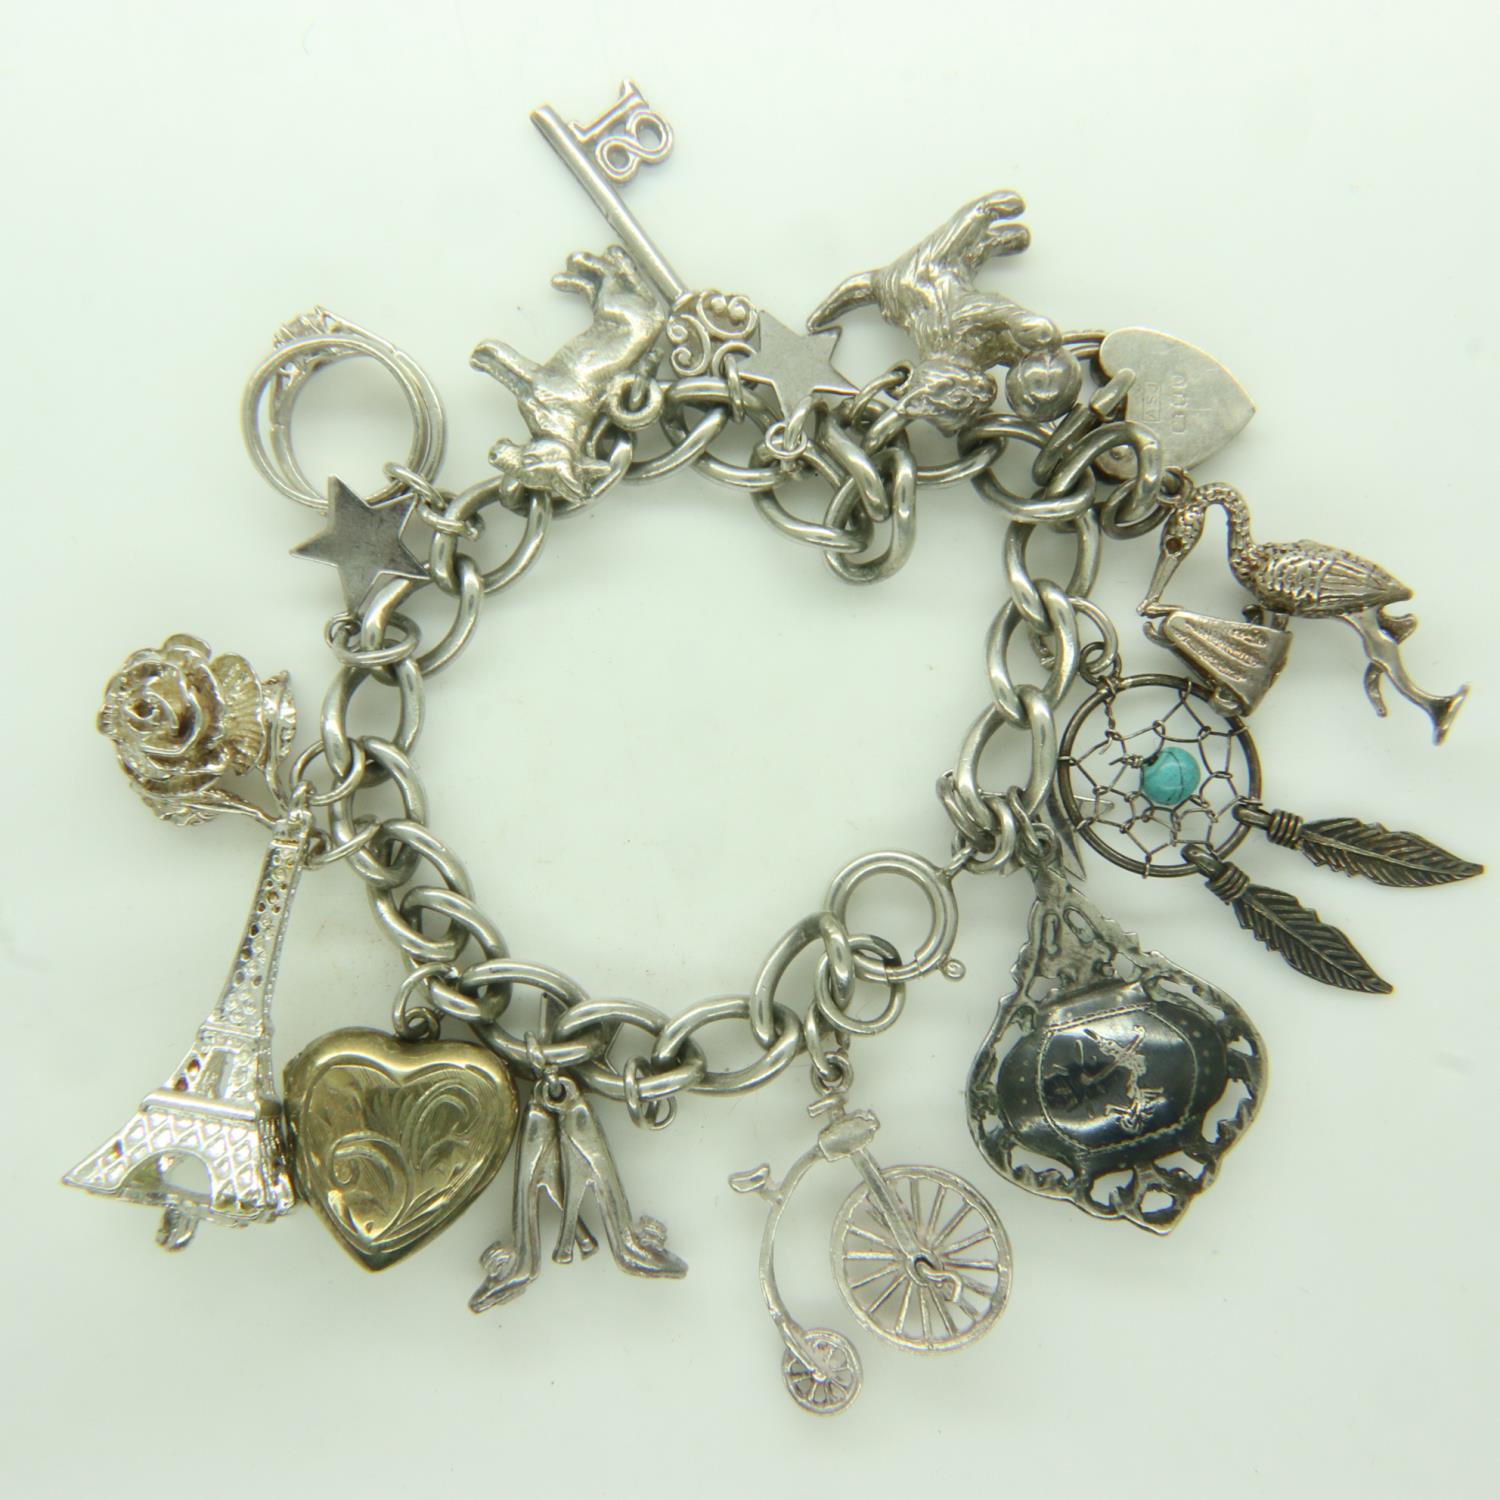 925 silver charm bracelet with seventeen charms, L: 21 cm, 47g. UK P&P Group 0 (£6+VAT for the first